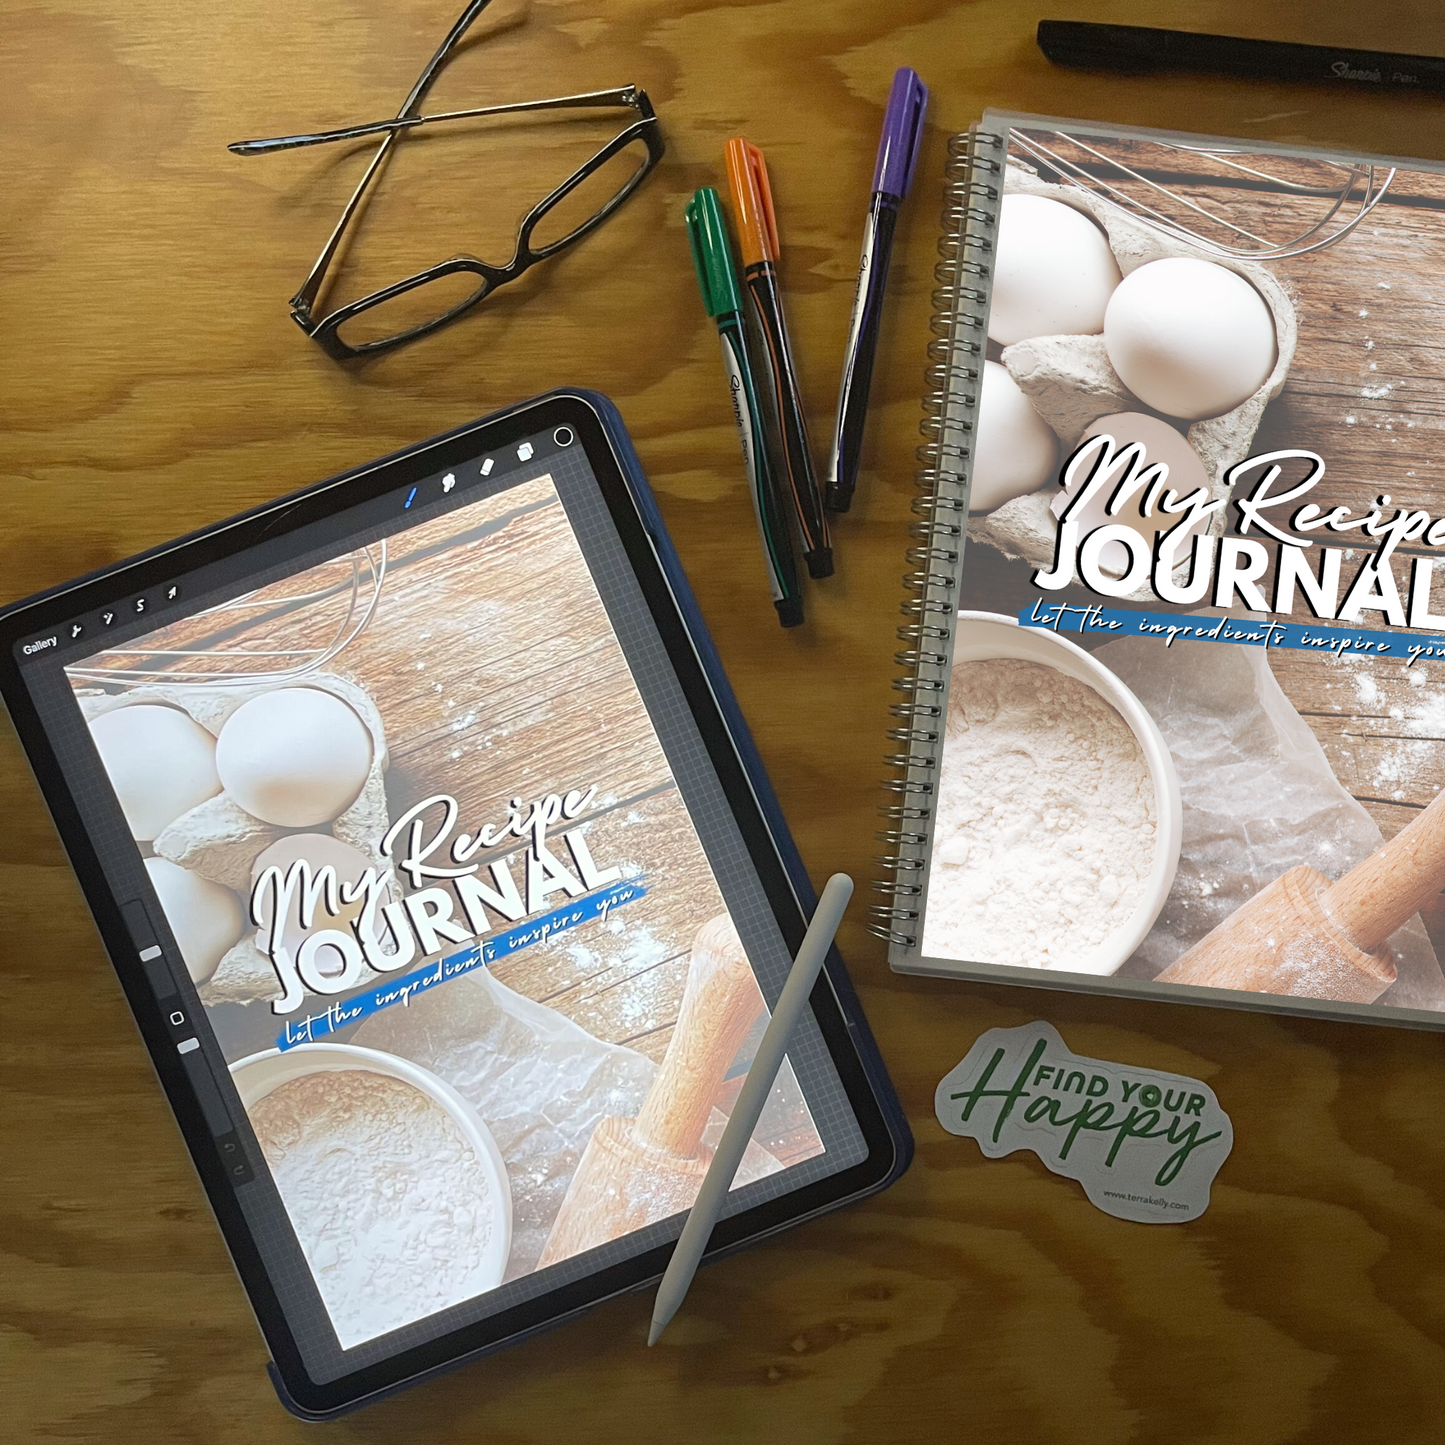 Printable Digital Recipe Journal | Dotted & Lined Downloadable Journal | GoodNotes, iPad, PDF